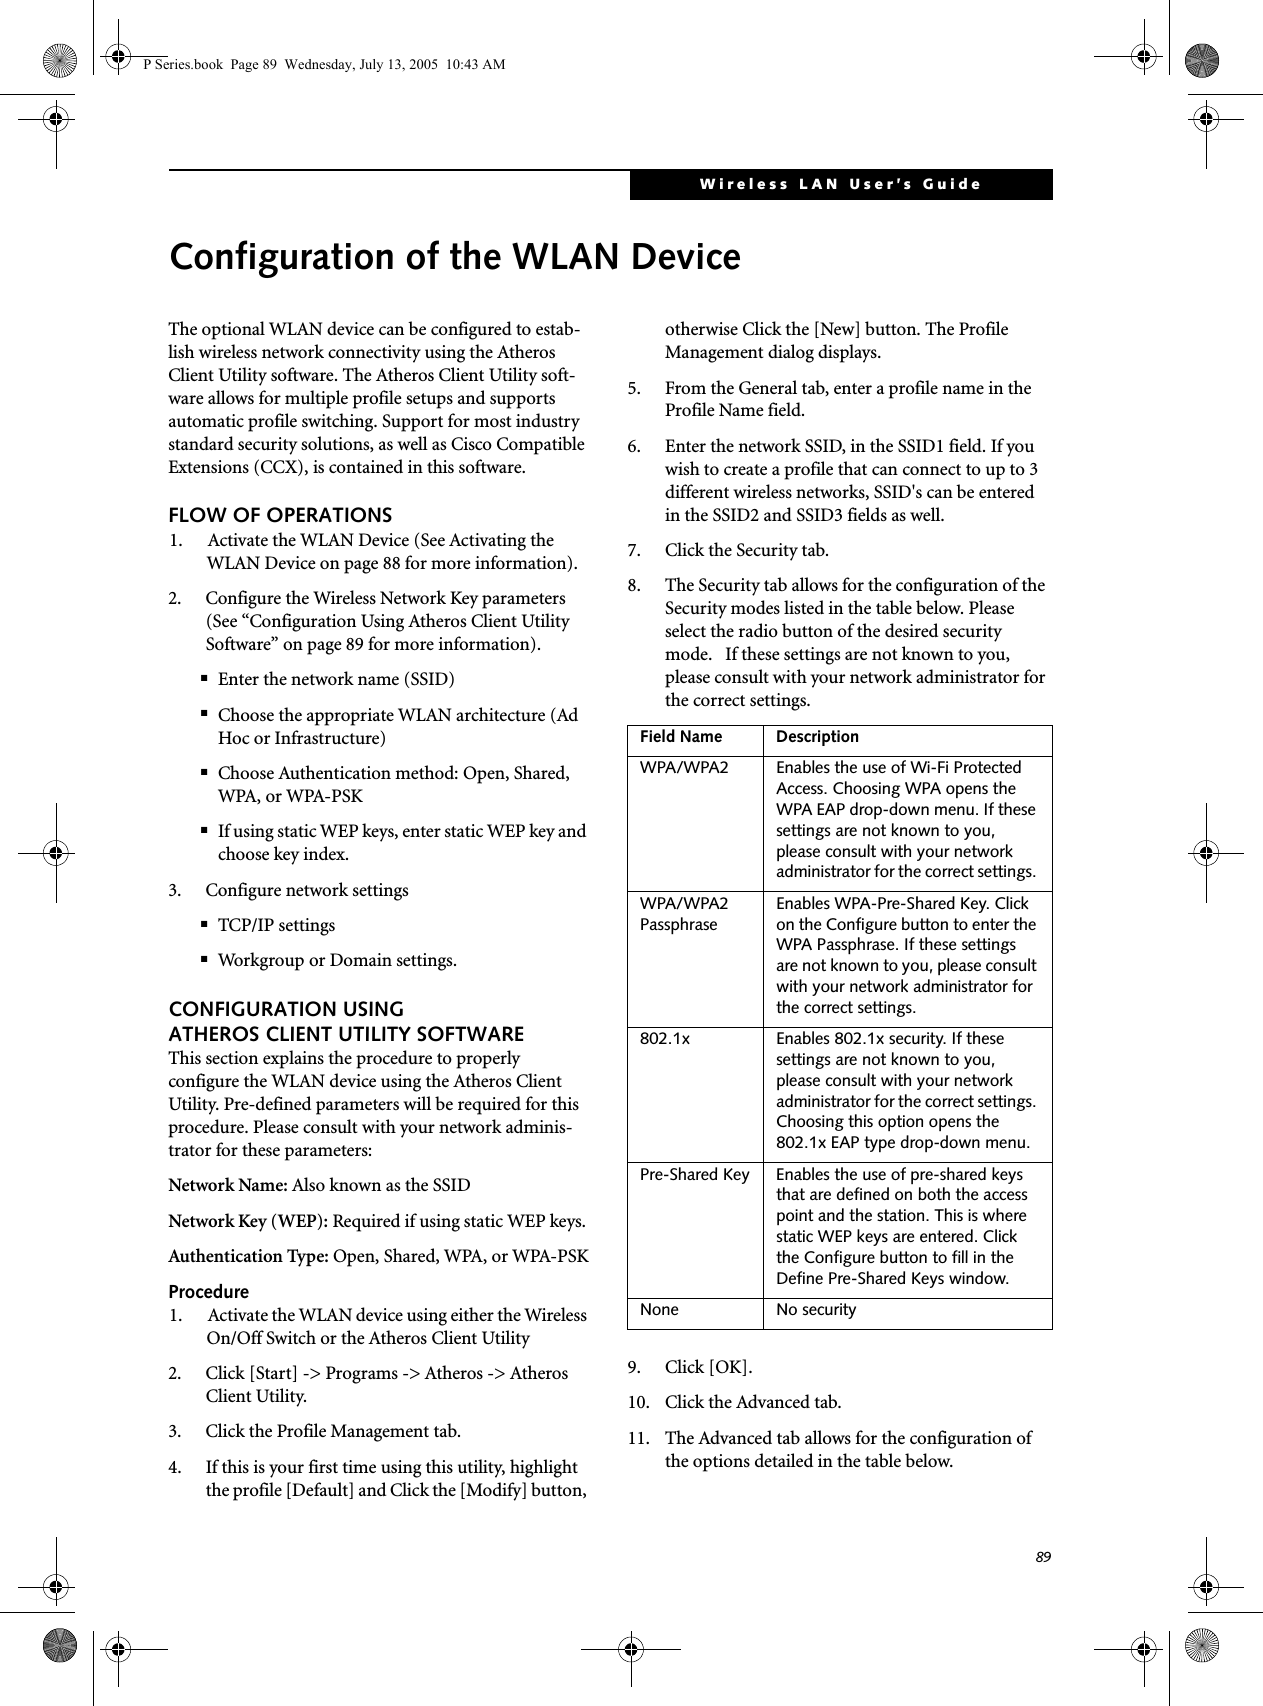 89Wireless LAN User’s Guide Configuration of the WLAN DeviceThe optional WLAN device can be configured to estab-lish wireless network connectivity using the Atheros Client Utility software. The Atheros Client Utility soft-ware allows for multiple profile setups and supports automatic profile switching. Support for most industry standard security solutions, as well as Cisco Compatible Extensions (CCX), is contained in this software.FLOW OF OPERATIONS1. Activate the WLAN Device (See Activating the WLAN Device on page 88 for more information).2. Configure the Wireless Network Key parameters (See “Configuration Using Atheros Client Utility Software” on page 89 for more information).■Enter the network name (SSID)■Choose the appropriate WLAN architecture (Ad Hoc or Infrastructure)■Choose Authentication method: Open, Shared, WPA, or WPA-PSK■If using static WEP keys, enter static WEP key and choose key index. 3. Configure network settings■TCP/IP settings■Workgroup or Domain settings.CONFIGURATION USING ATHEROS CLIENT UTILITY SOFTWAREThis section explains the procedure to properly configure the WLAN device using the Atheros Client Utility. Pre-defined parameters will be required for this procedure. Please consult with your network adminis-trator for these parameters:Network Name: Also known as the SSIDNetwork Key (WEP): Required if using static WEP keys. Authentication Type: Open, Shared, WPA, or WPA-PSKProcedure1. Activate the WLAN device using either the Wireless On/Off Switch or the Atheros Client Utility2. Click [Start] -&gt; Programs -&gt; Atheros -&gt; Atheros Client Utility.3. Click the Profile Management tab. 4. If this is your first time using this utility, highlight the profile [Default] and Click the [Modify] button, otherwise Click the [New] button. The Profile Management dialog displays. 5. From the General tab, enter a profile name in the Profile Name field. 6. Enter the network SSID, in the SSID1 field. If you wish to create a profile that can connect to up to 3 different wireless networks, SSID&apos;s can be entered in the SSID2 and SSID3 fields as well.7. Click the Security tab. 8. The Security tab allows for the configuration of the Security modes listed in the table below. Please select the radio button of the desired security mode.   If these settings are not known to you, please consult with your network administrator for the correct settings. 9. Click [OK].10. Click the Advanced tab.11. The Advanced tab allows for the configuration of the options detailed in the table below.Field Name DescriptionWPA/WPA2 Enables the use of Wi-Fi Protected Access. Choosing WPA opens the WPA EAP drop-down menu. If these settings are not known to you, please consult with your network administrator for the correct settings. WPA/WPA2 Passphrase Enables WPA-Pre-Shared Key. Click on the Configure button to enter the WPA Passphrase. If these settings are not known to you, please consult with your network administrator for the correct settings. 802.1x Enables 802.1x security. If these settings are not known to you, please consult with your network administrator for the correct settings. Choosing this option opens the 802.1x EAP type drop-down menu.Pre-Shared Key Enables the use of pre-shared keys that are defined on both the access point and the station. This is where static WEP keys are entered. Click the Configure button to fill in the Define Pre-Shared Keys window.None No securityP Series.book  Page 89  Wednesday, July 13, 2005  10:43 AM